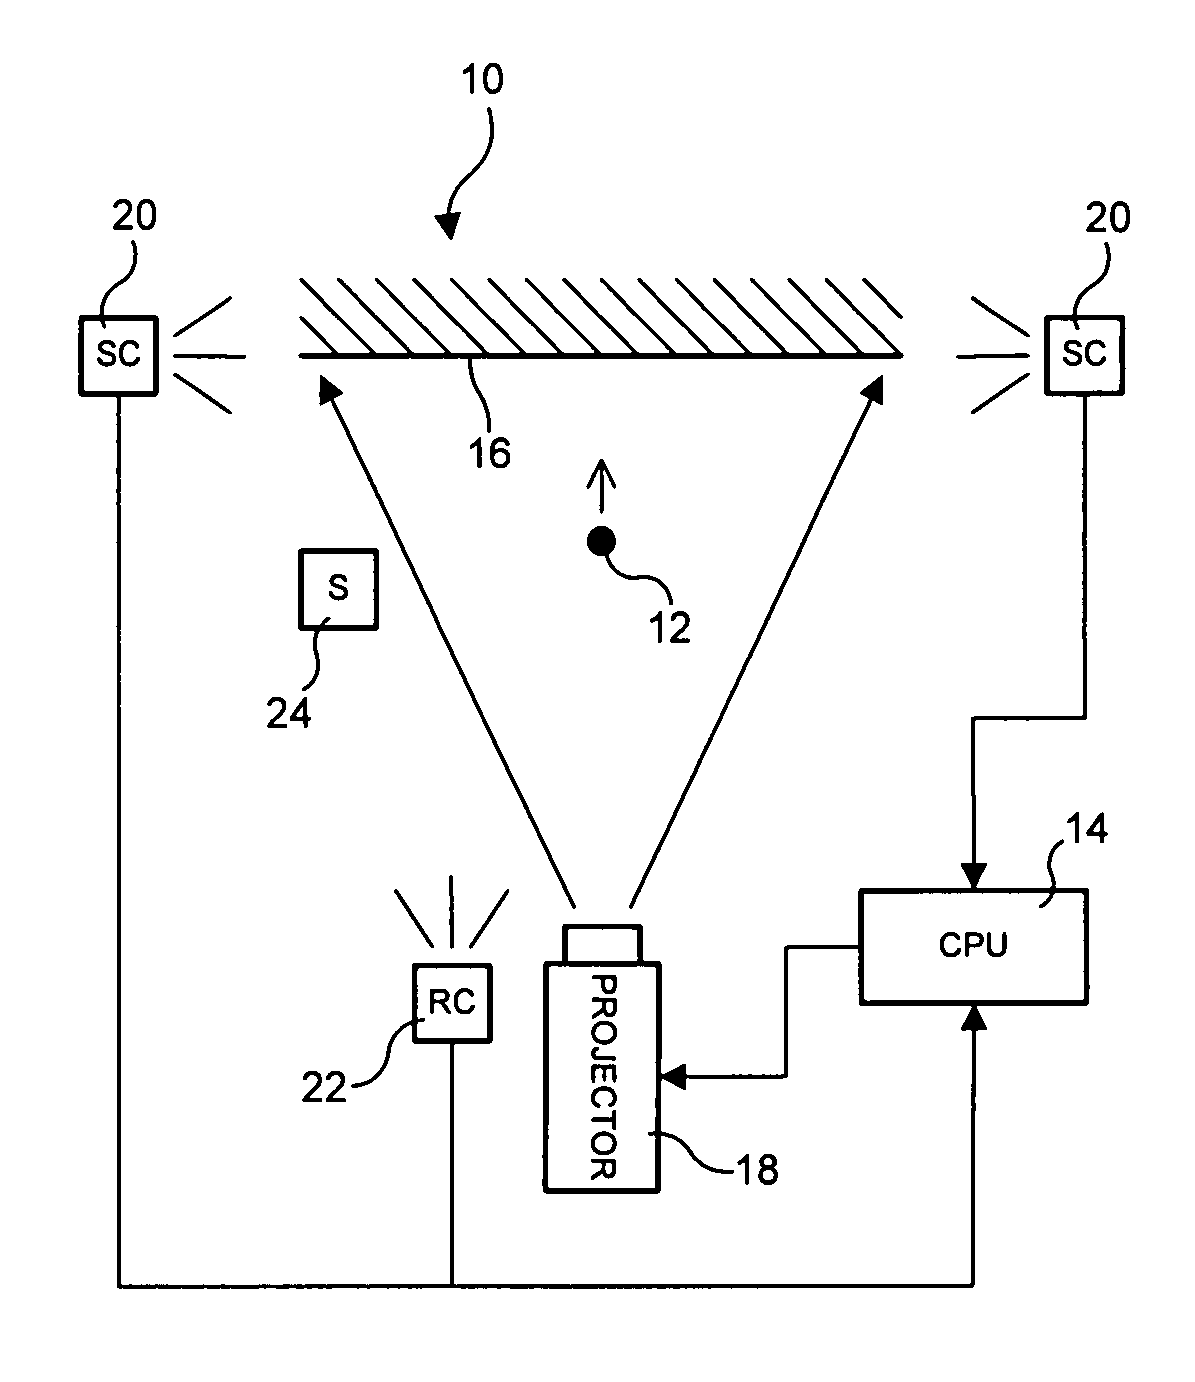 System for promoting physical activity employing impact position sensing and response